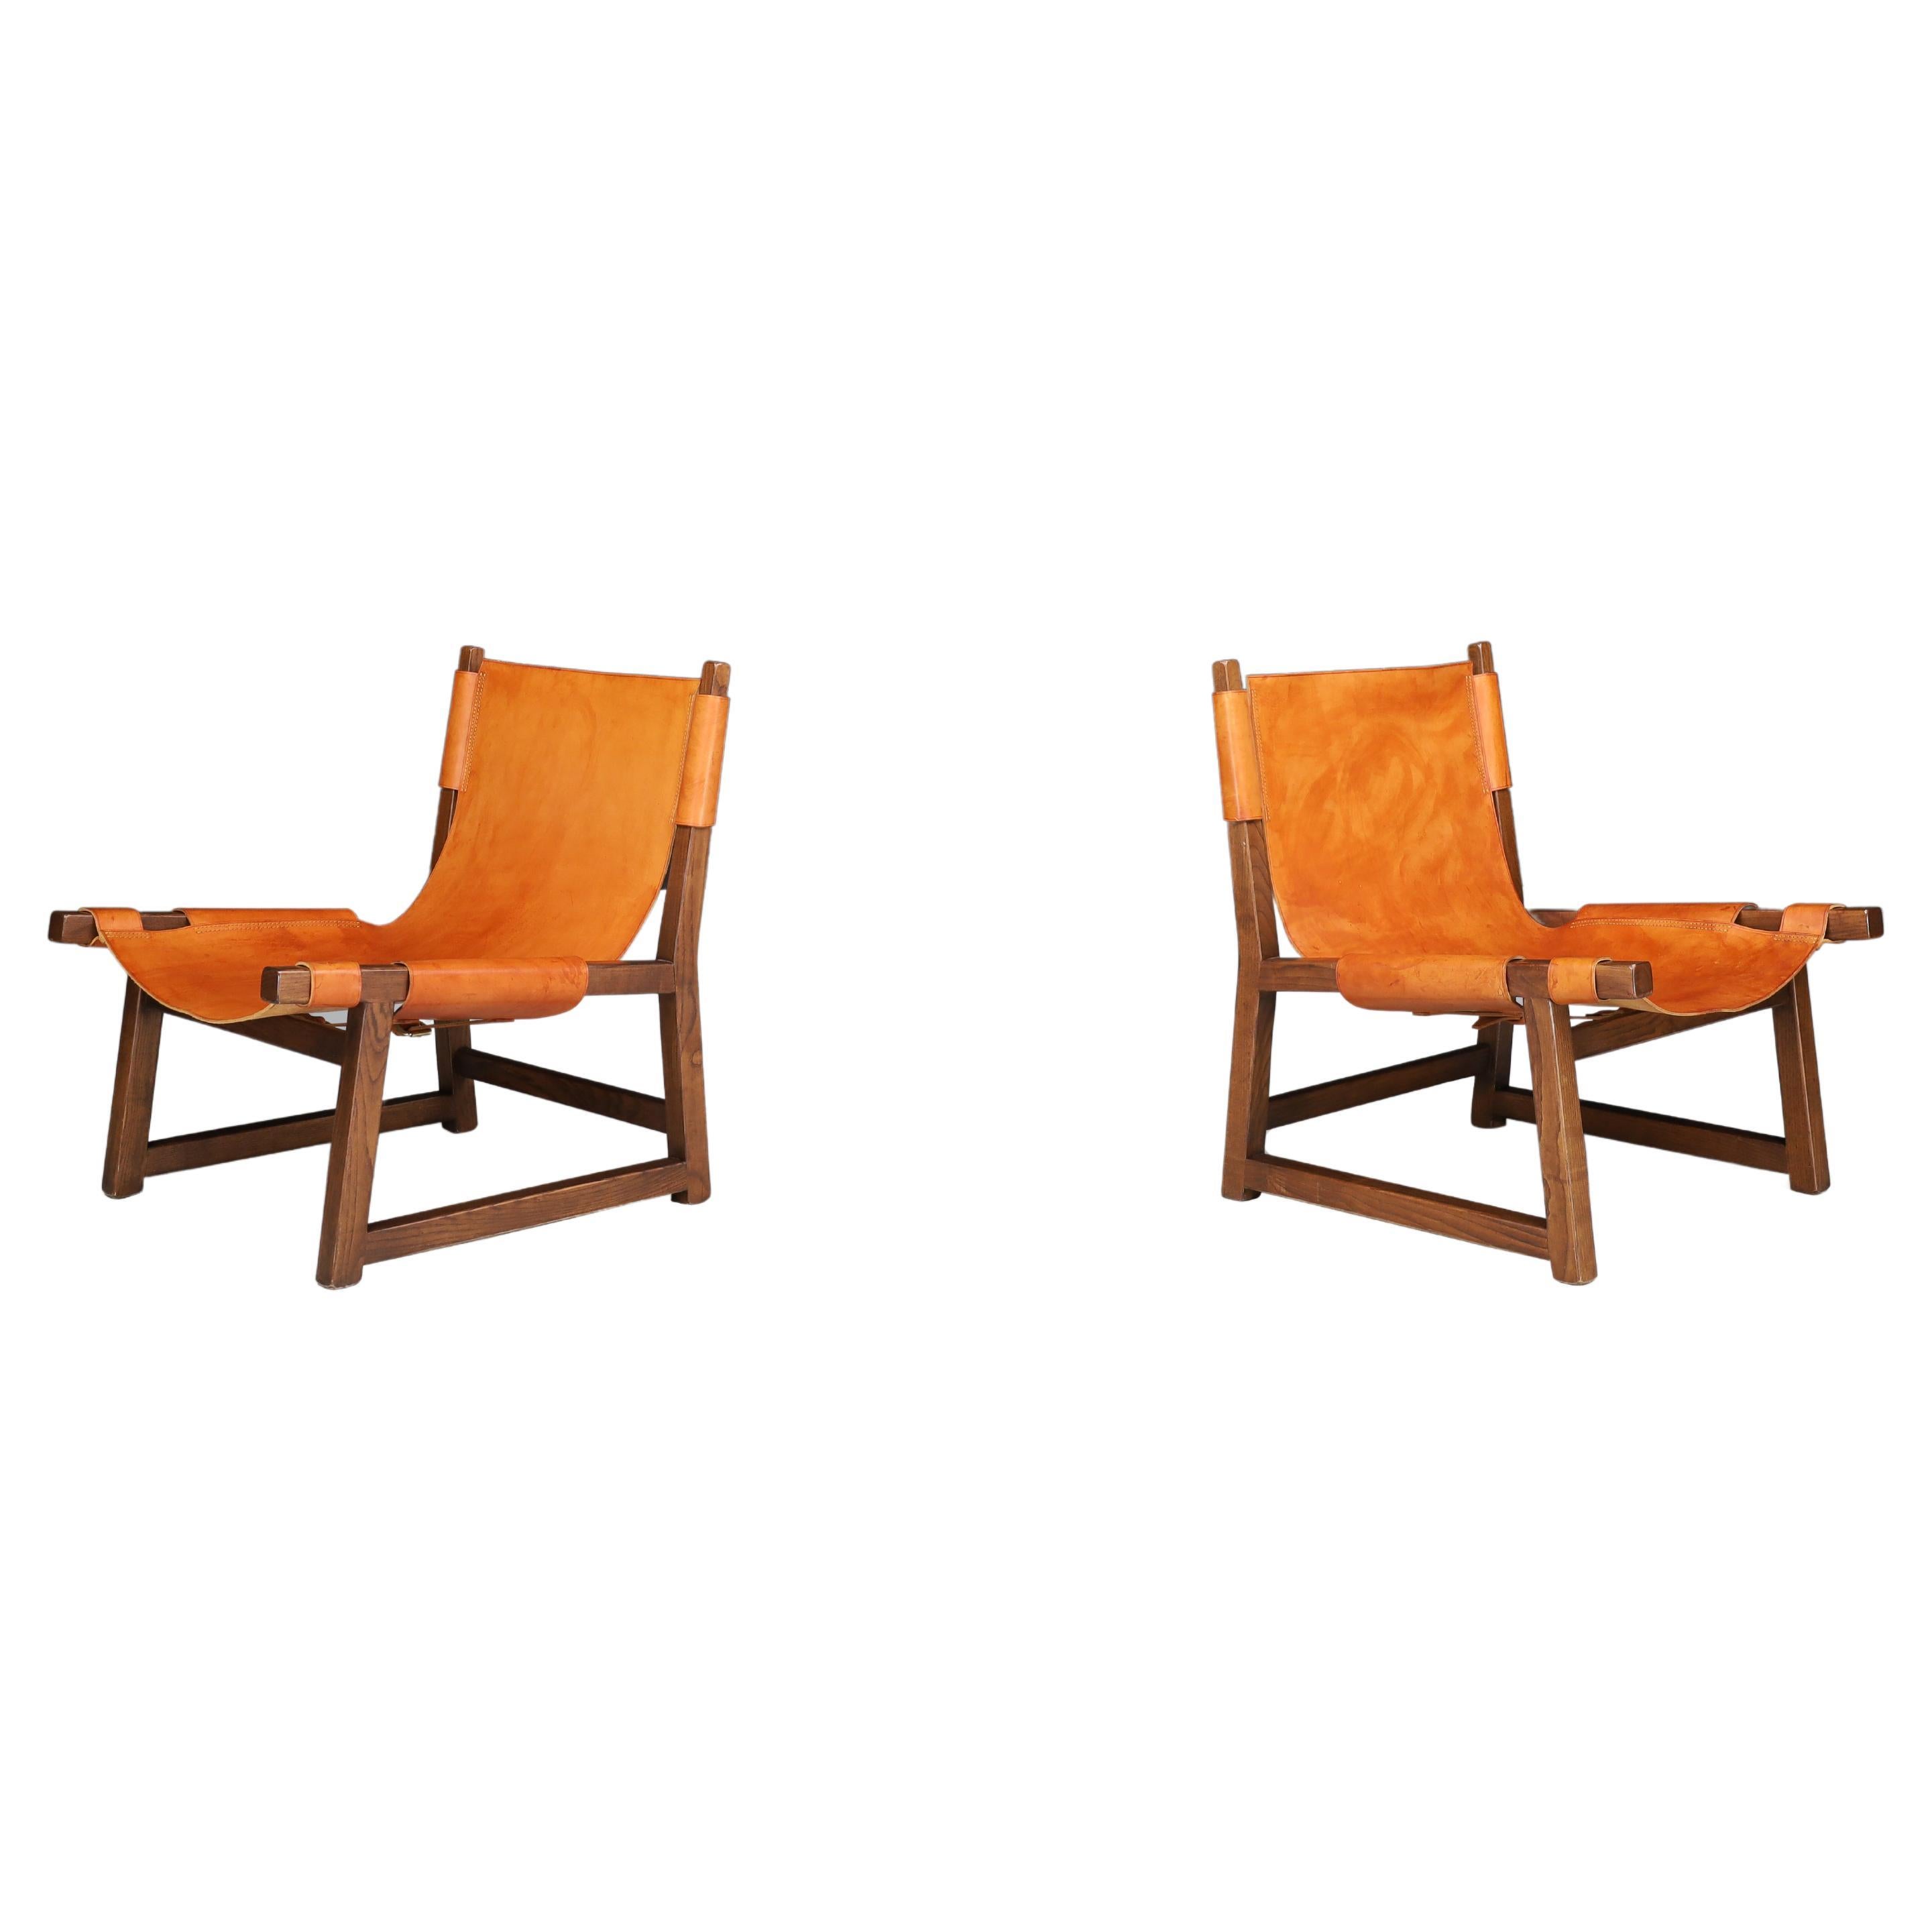 Paco Muñoz pair of 'Riaza' lounge chairs In Walnut and Cognac Leather Spain 1960